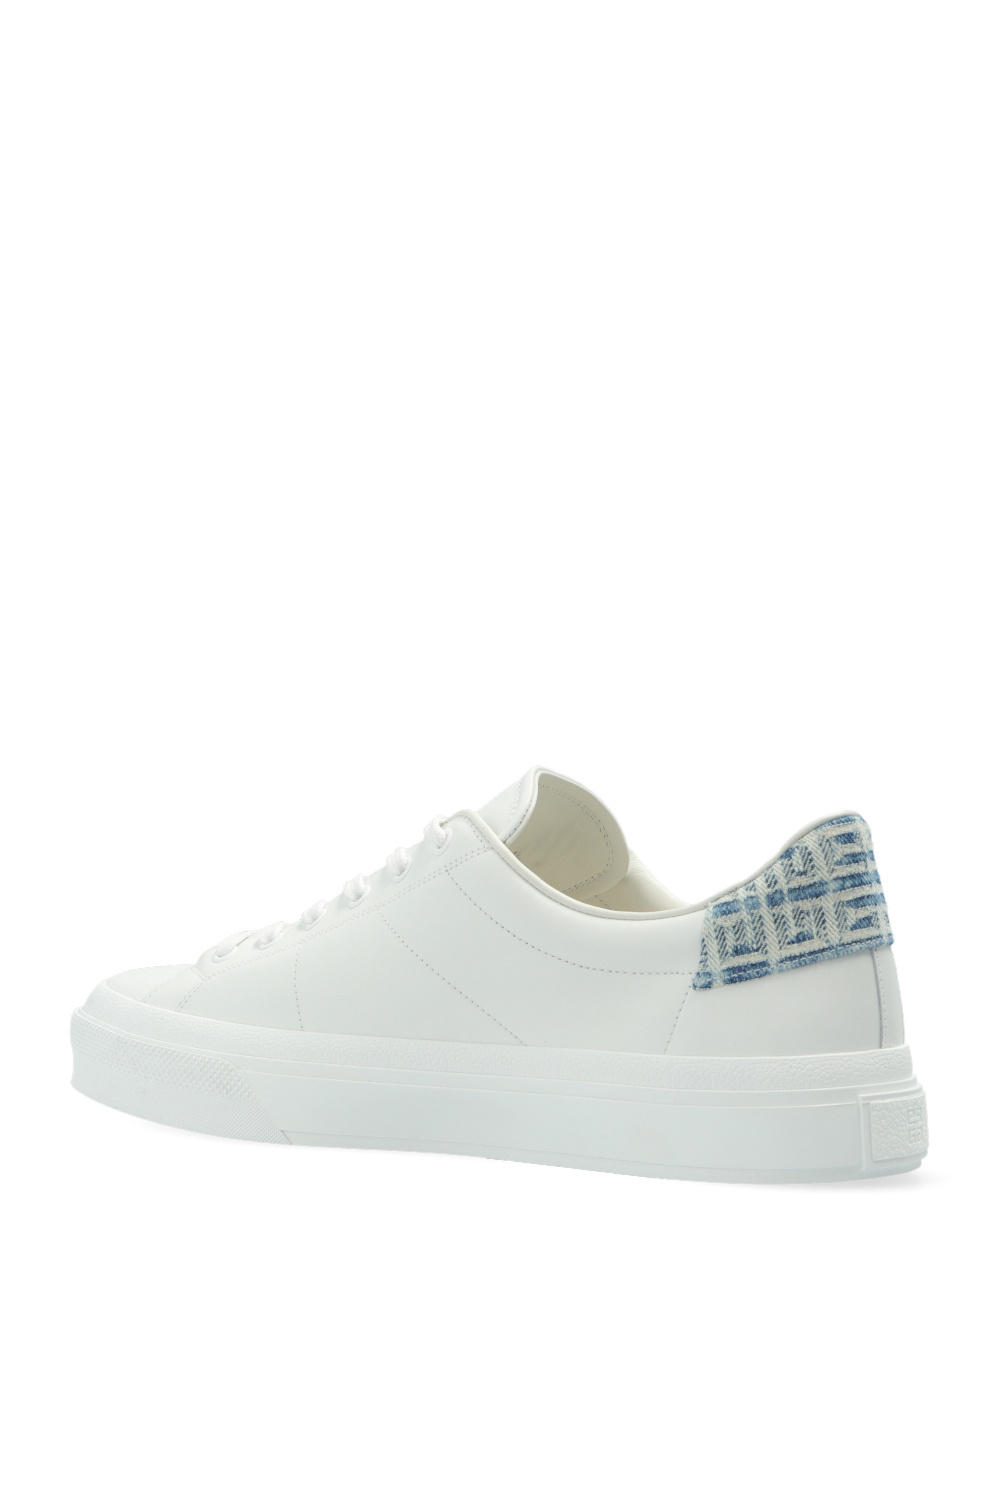 givenchy Pastel ‘City Sport’ leather sneakers